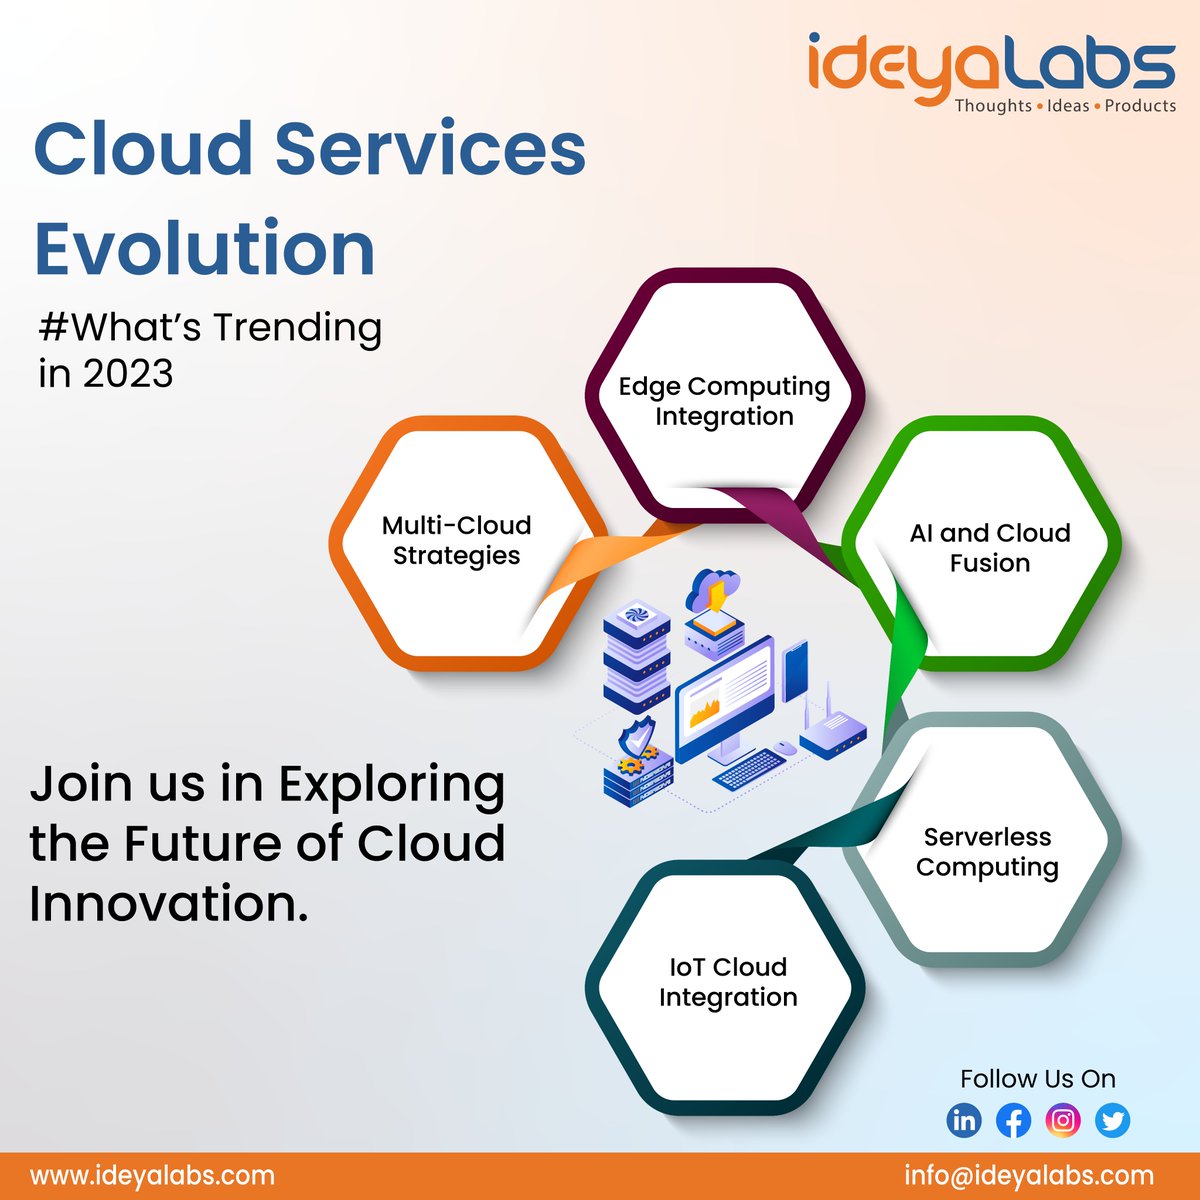 #MultiCloudTrends: Discover the #CloudServices Evolution: 2023's Hottest Trends! #ideyaLabs
#DigitalTransformation #Multicloud #HybridCloud #MultiCloudManagement #CloudSolutions
@Shi4Tech @GRAUSAFL @Fabriziobustama @EvanKirstel @TechNative @Ronald_vanLoon @Nicochan33 @sallyeaves